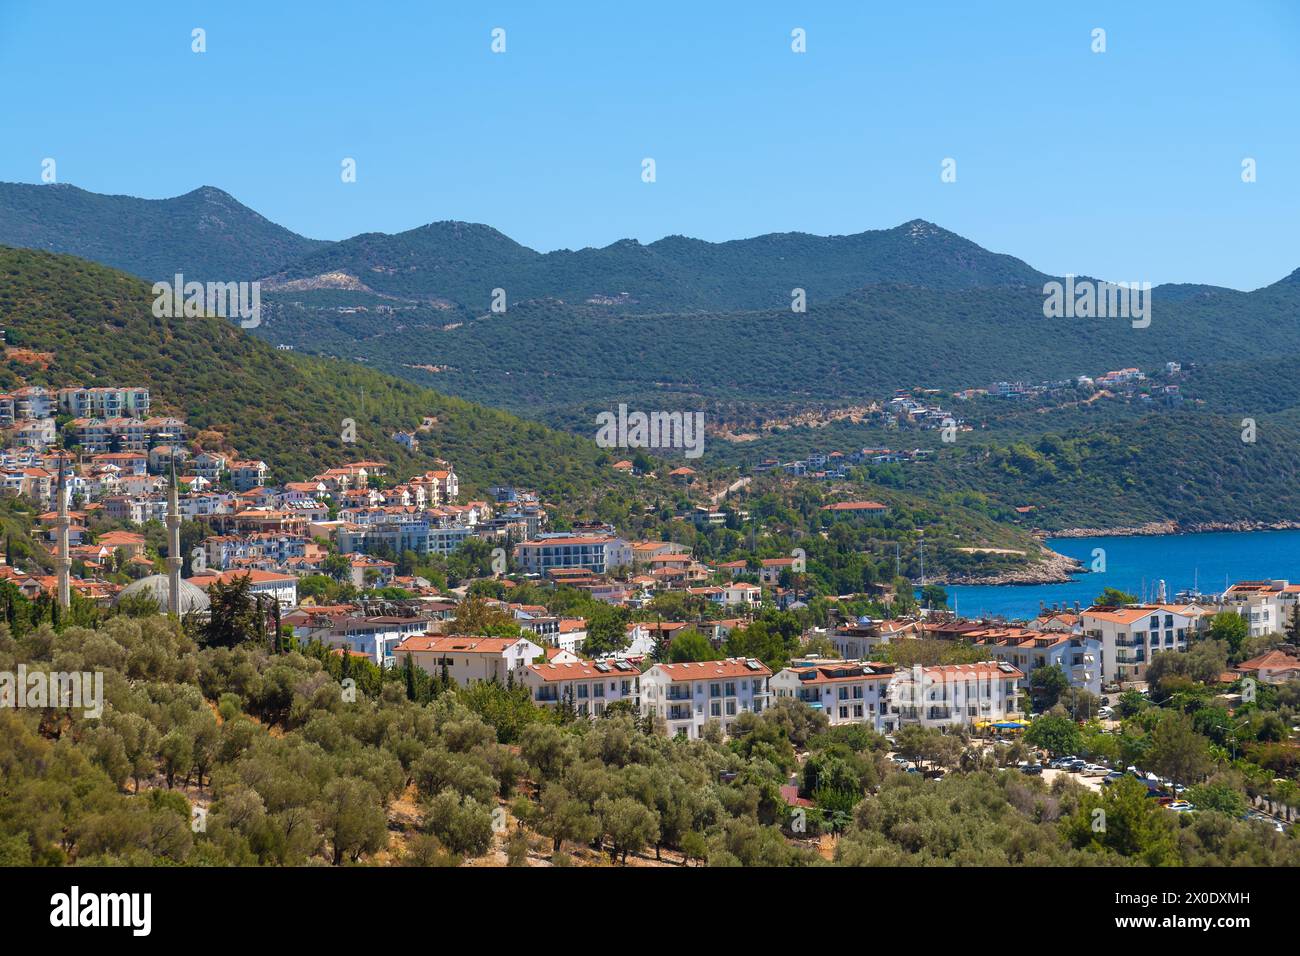 Beautiful view of the seaside resort town of Kas in Turkey. Villas and hotels with red roofs are open to tourists Stock Photo